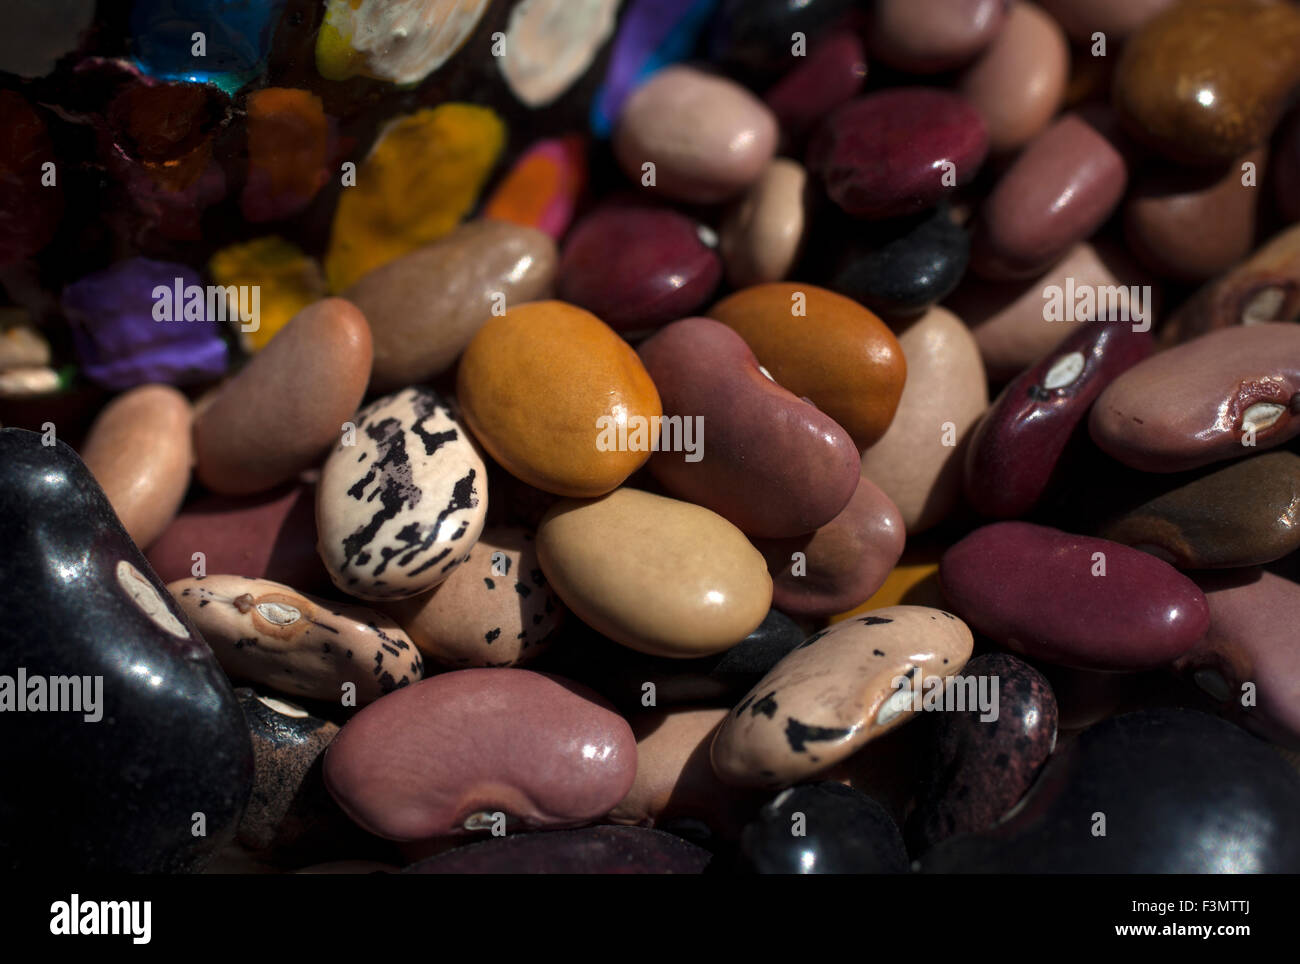 Multicolored kidney beans in 'Tepetlixpa Seed Bank', created by Tomas Villanueva Buendia 'Tomaicito' to protect and rescue the original varieties of Mexican corn Stock Photo